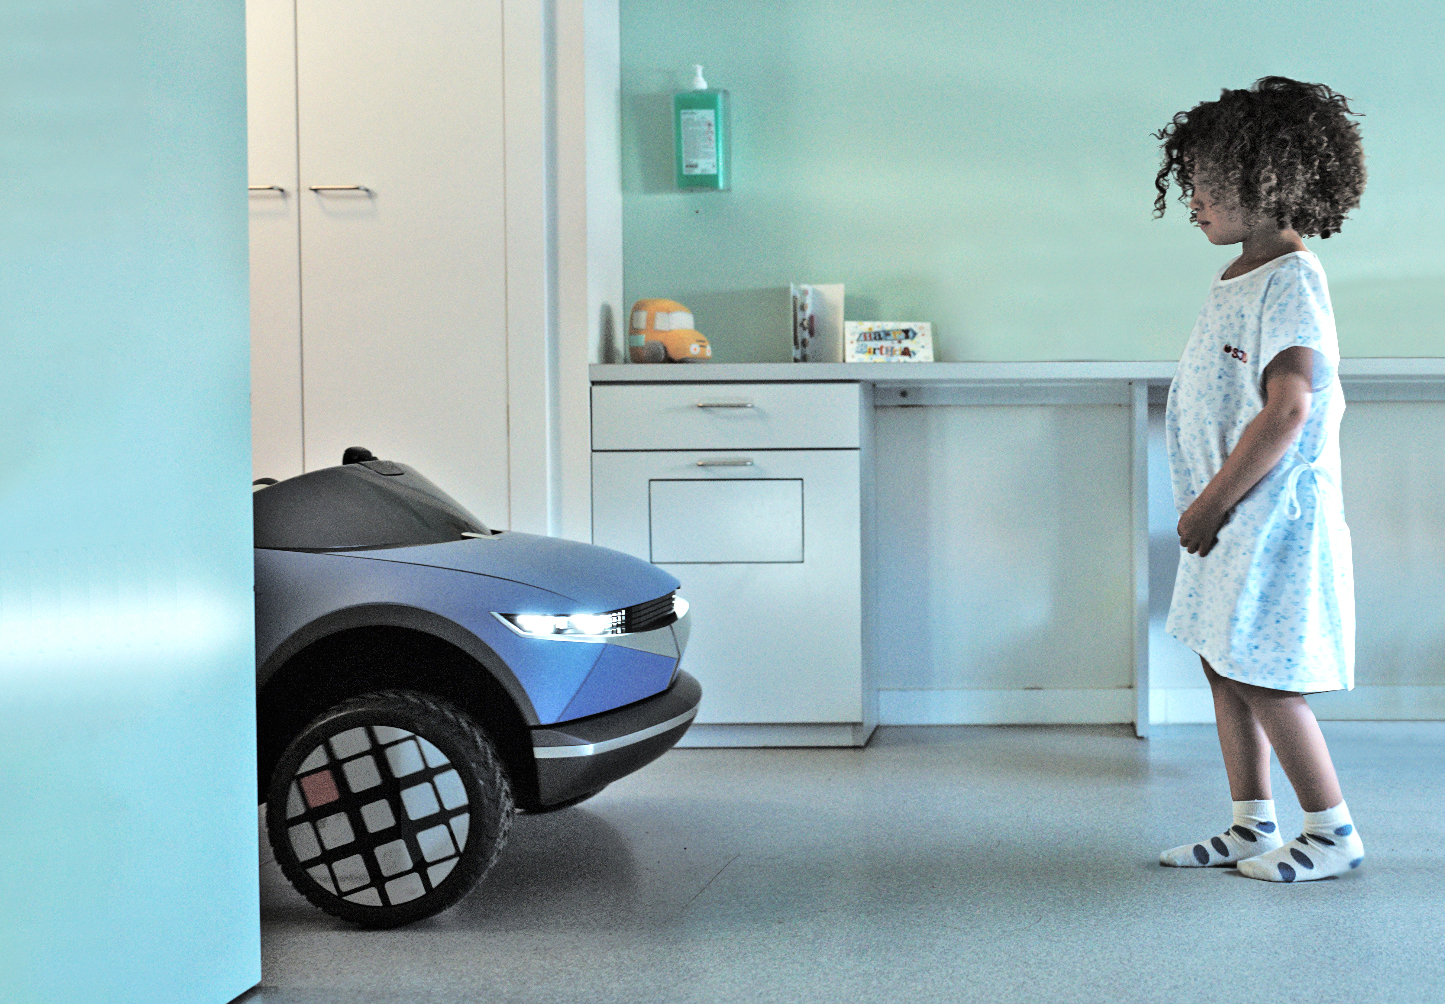 Hyundai Made This Minicar For A Children’s Hospital And It Completely Rules